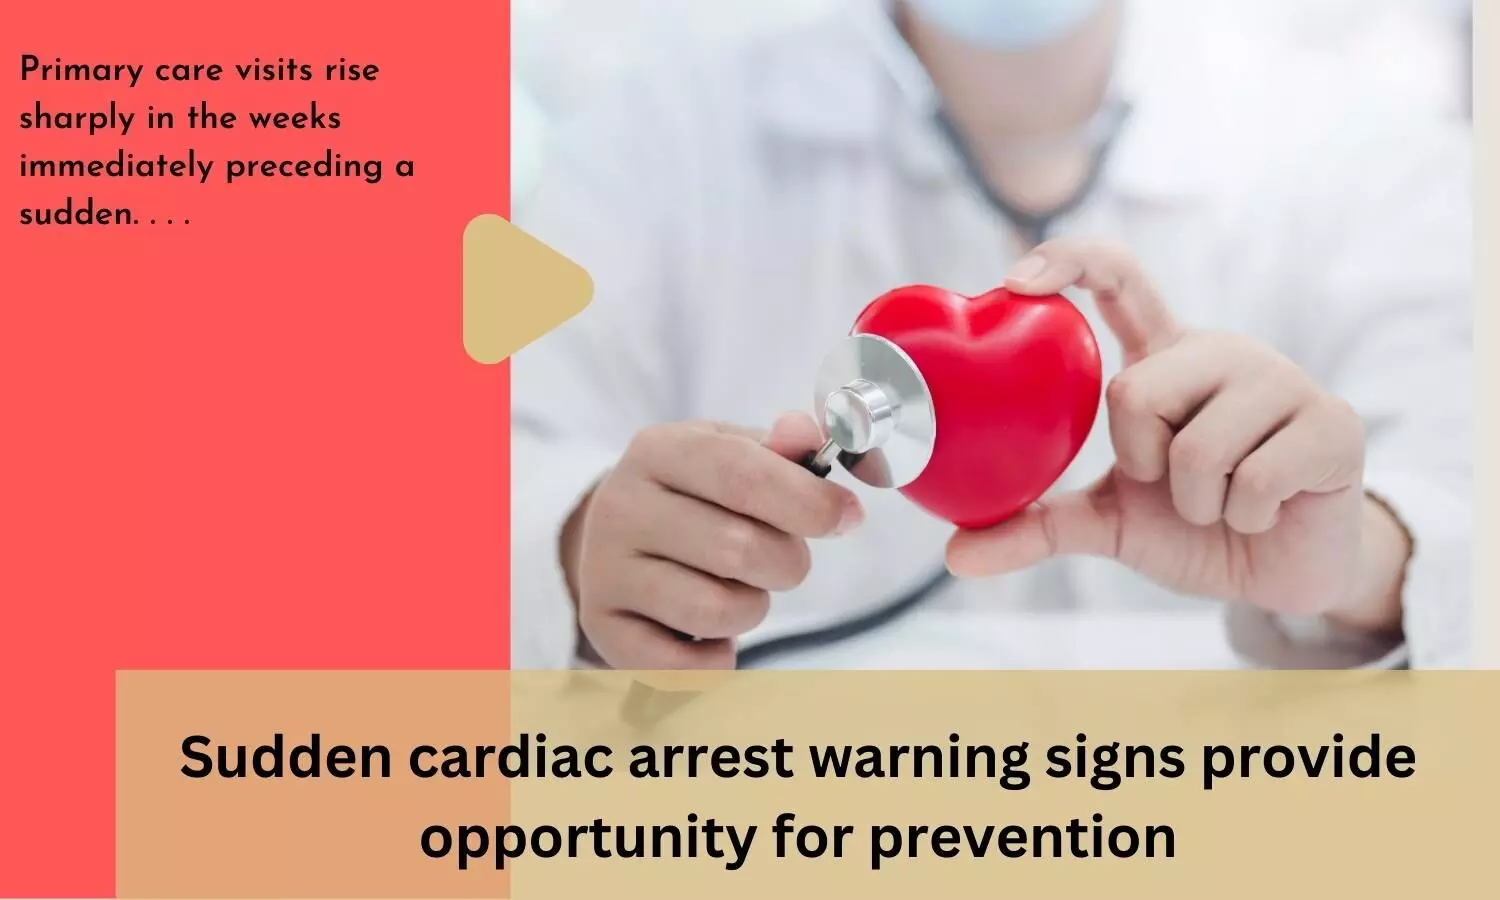 Sudden cardiac arrest warning signs provide opportunity for prevention